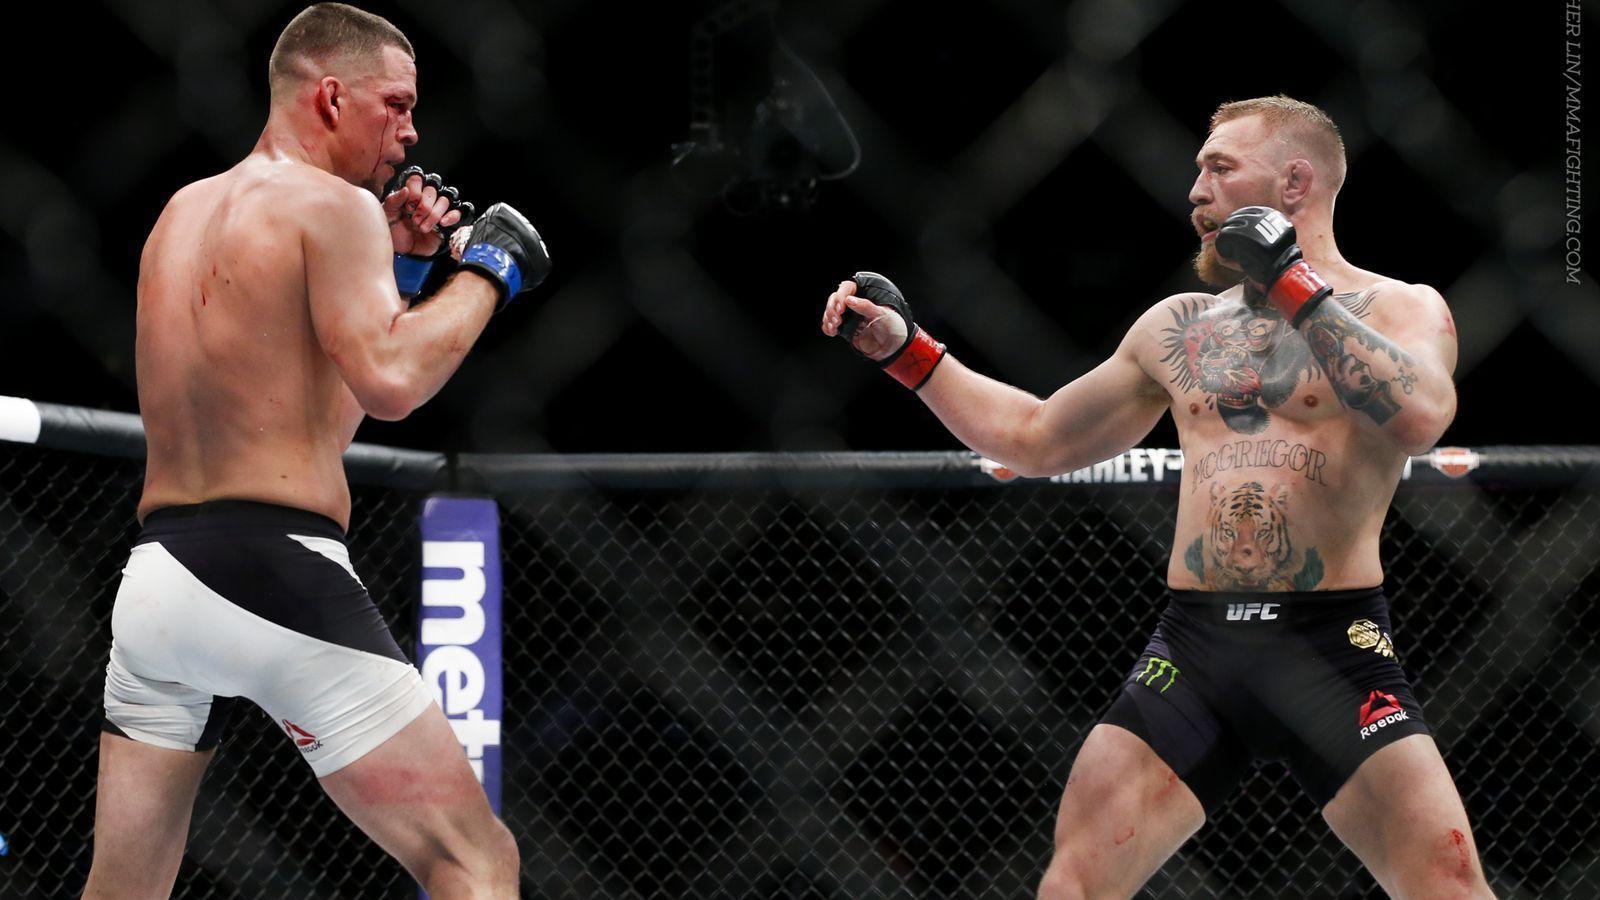 Conor McGregor vs. Nate Diaz 2 in the works for UFC 202 updated